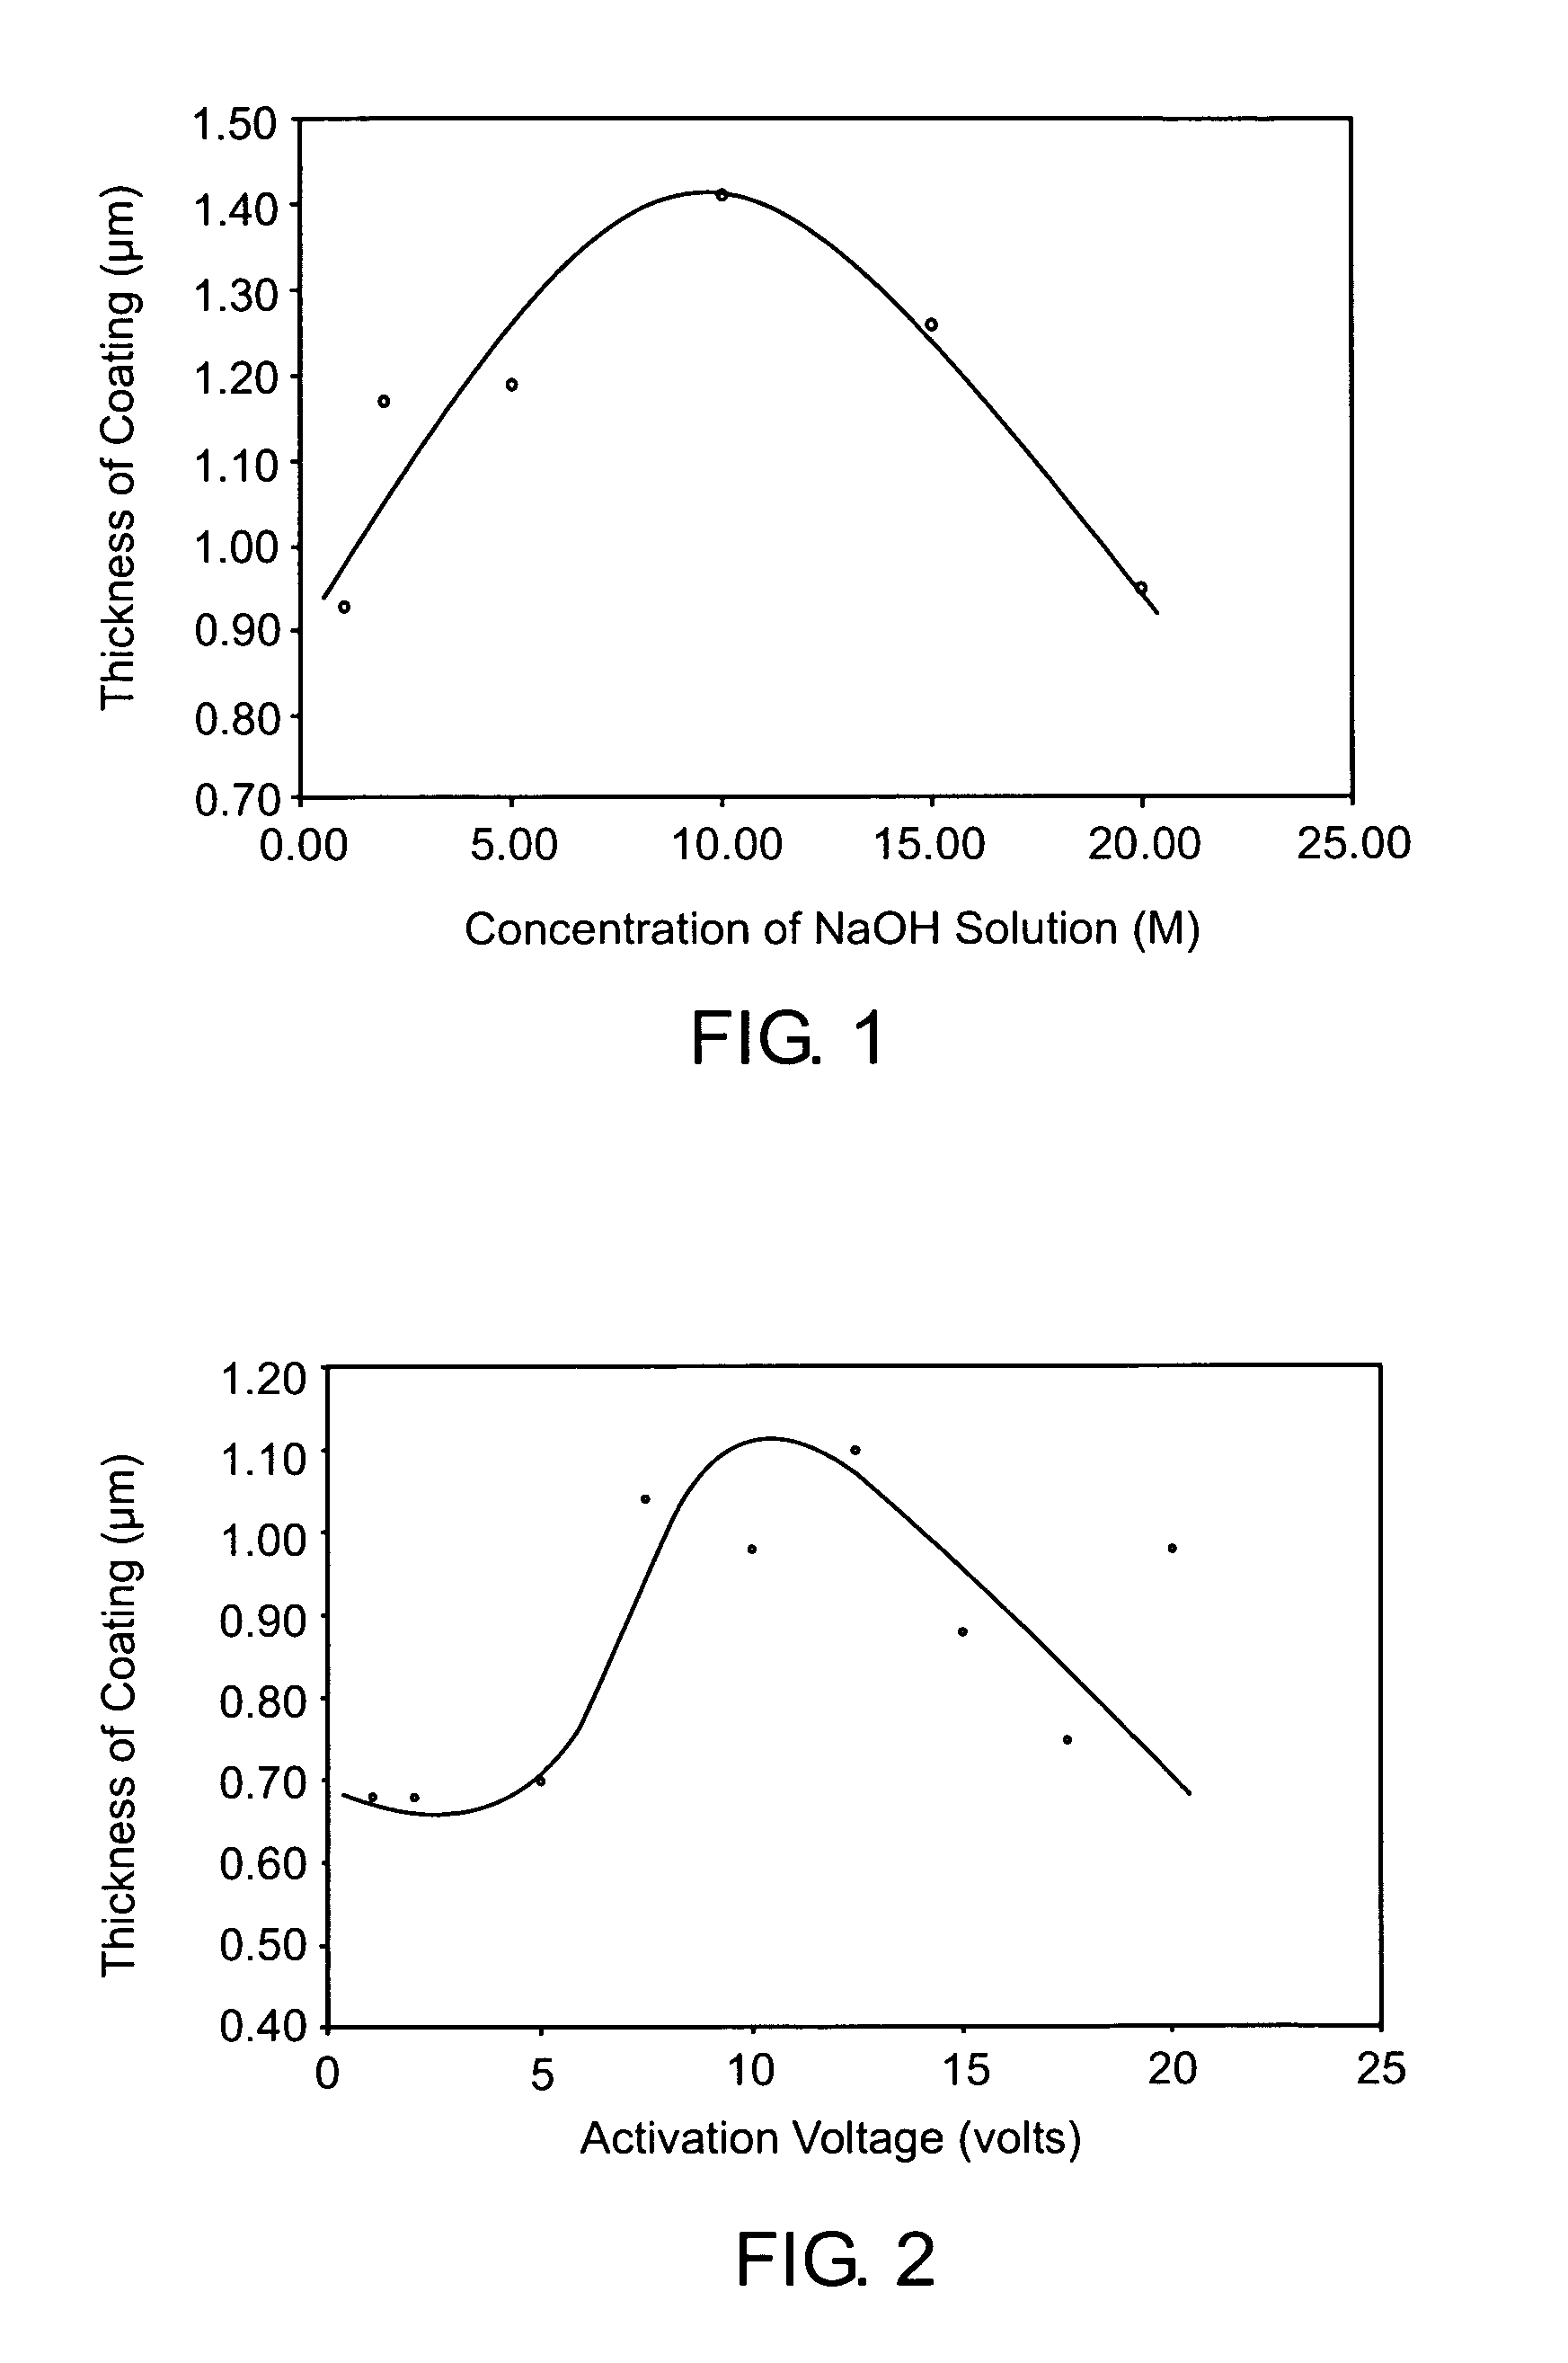 Bioceramic coating of a metal-containing substrate